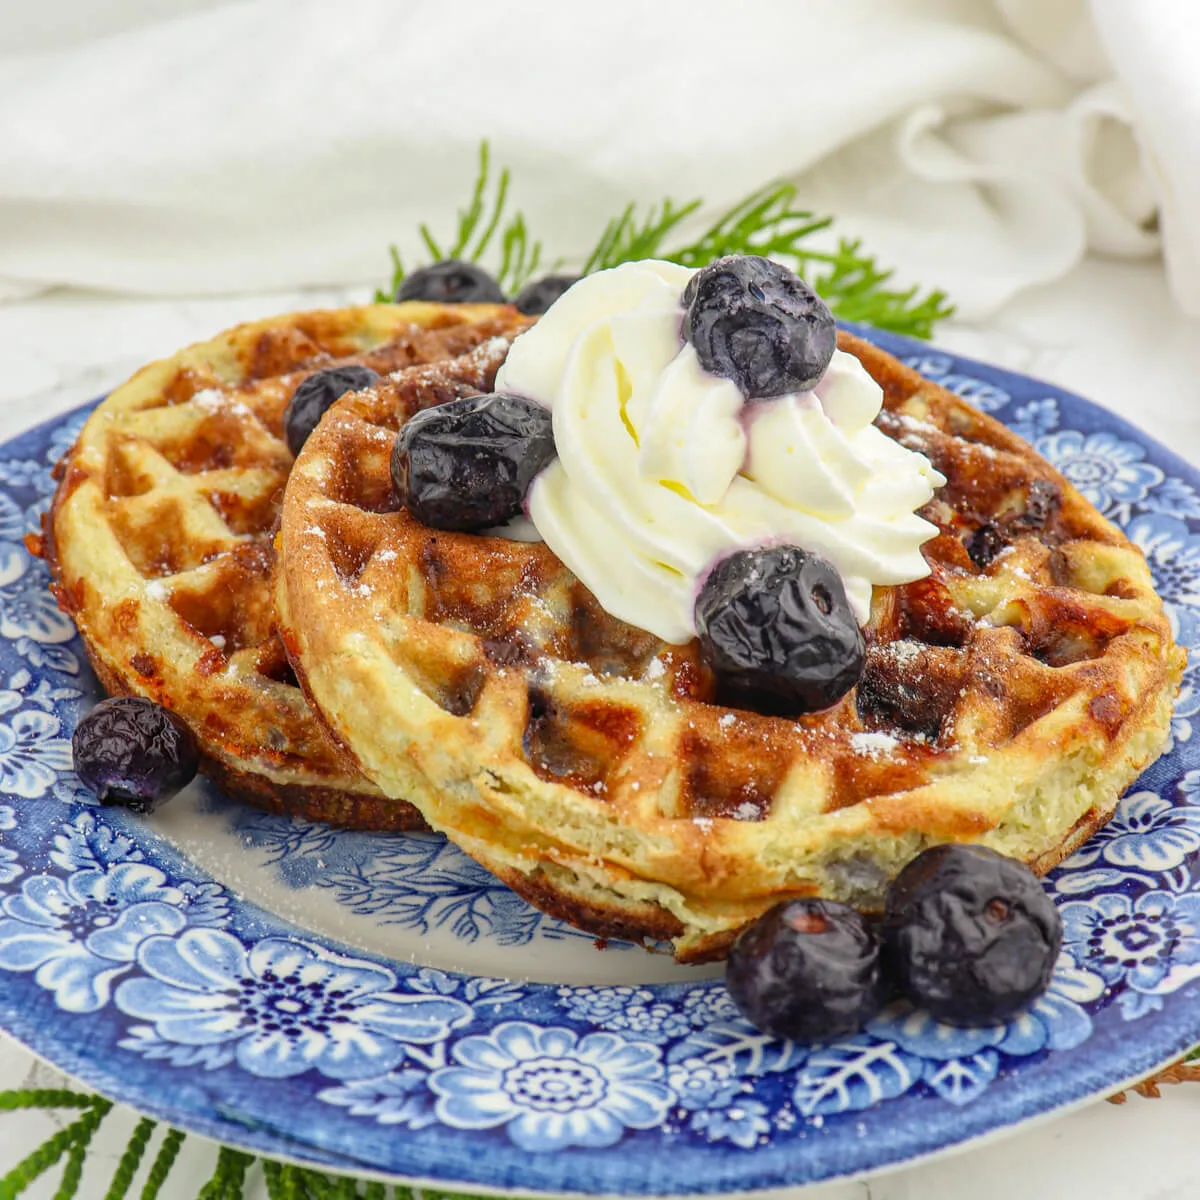 Delicious blueberry chaffles are a fabulous keto low carb breakfast! Gluten-free with classic blueberry morning flavor.